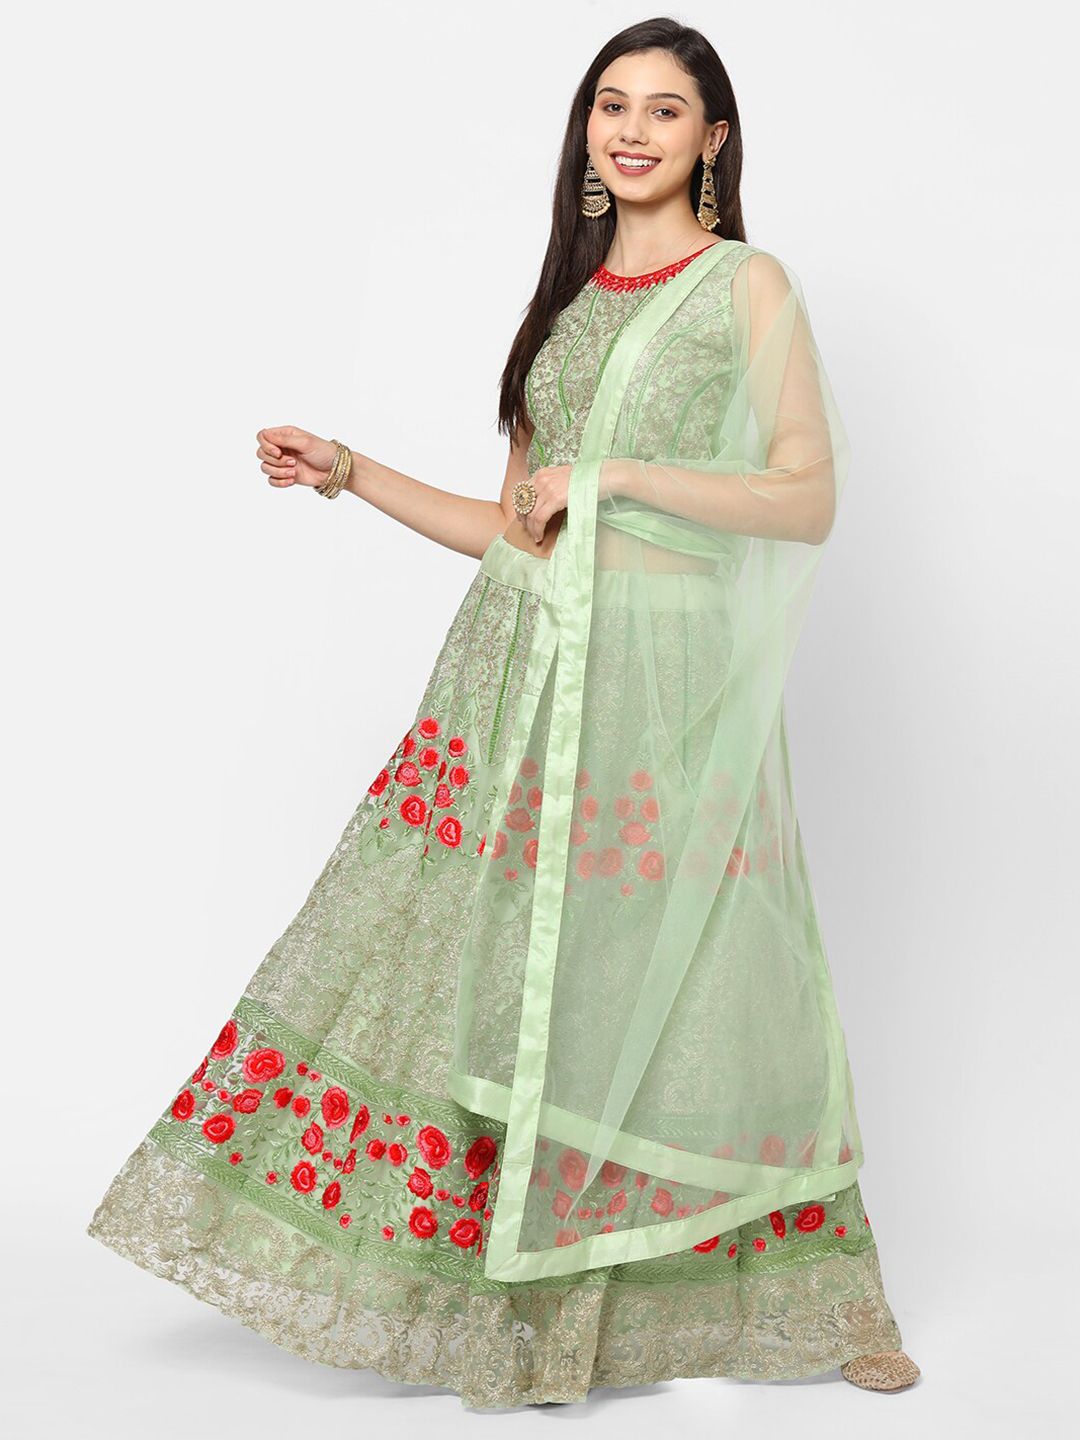 RedRound Green & Red Embroidered Thread Work Semi-Stitched Lehenga & Unstitched Blouse With Dupatta Price in India